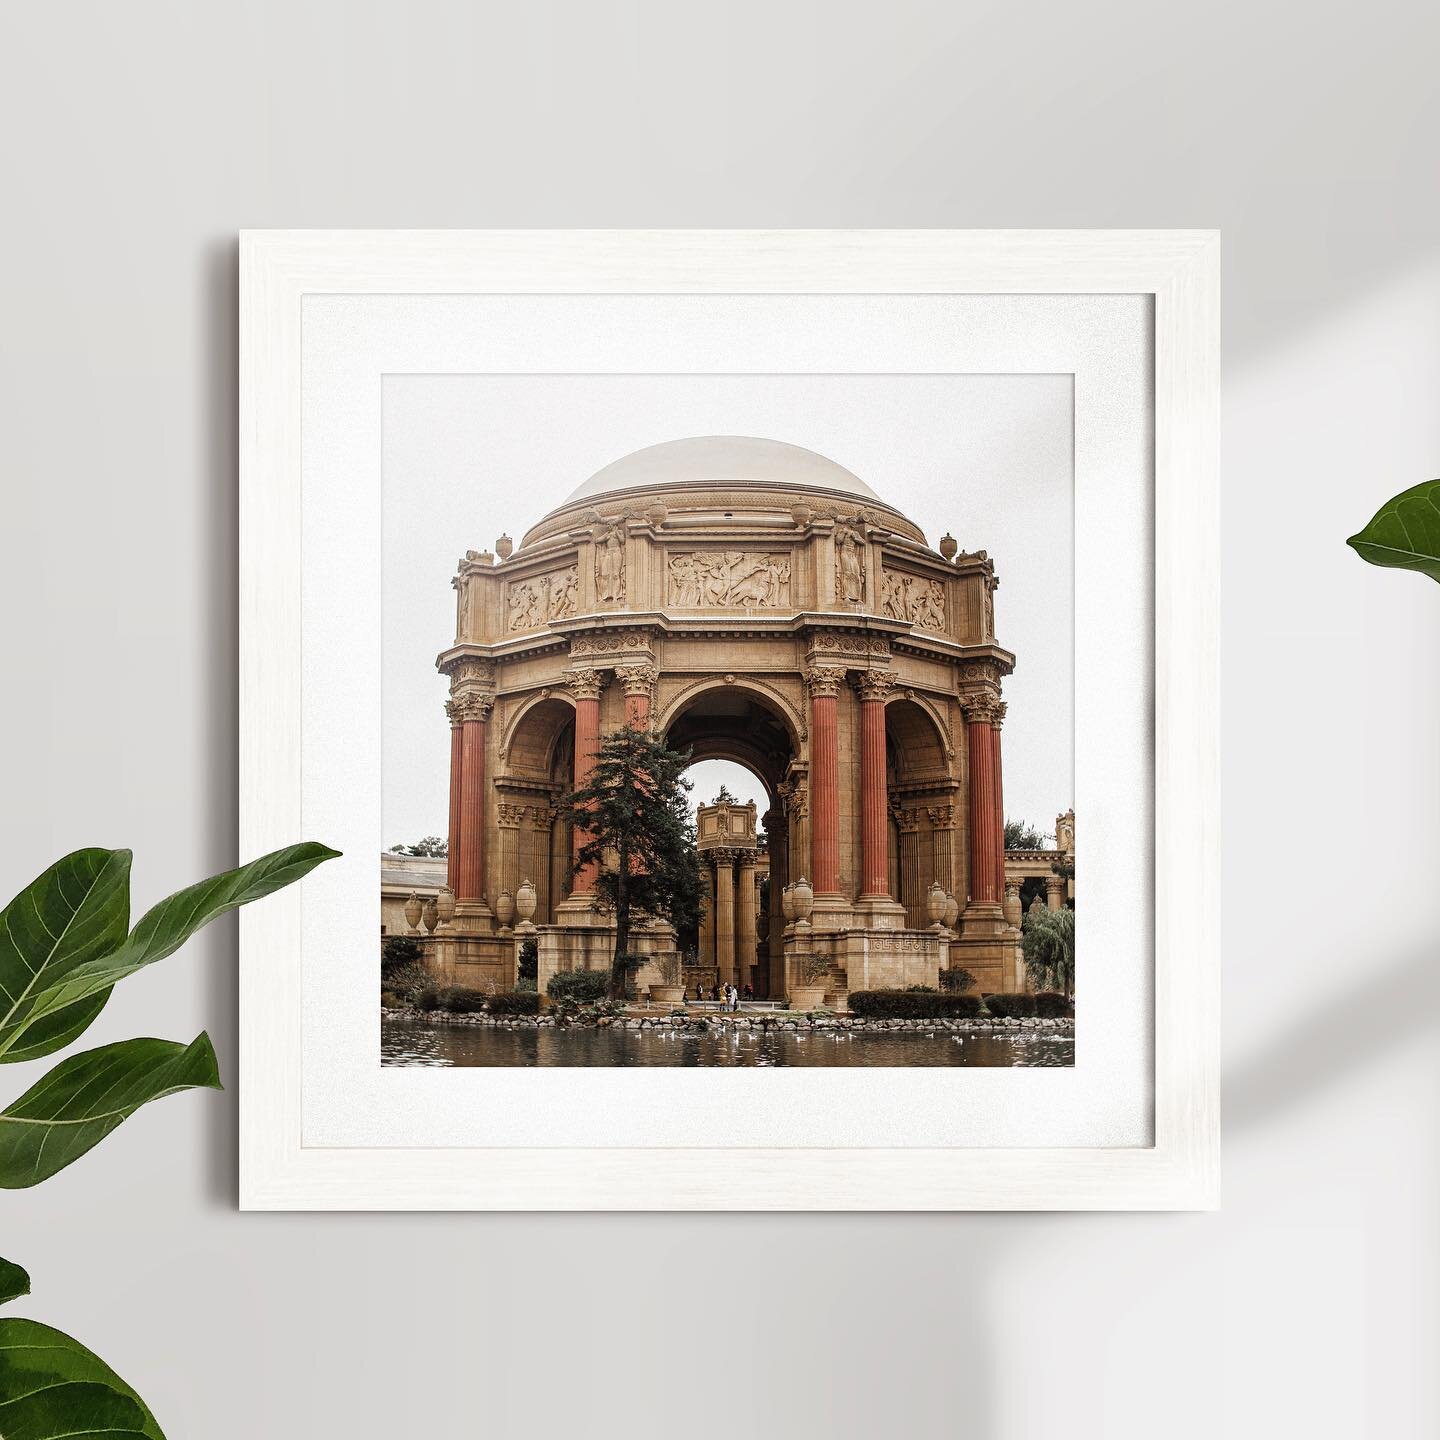 Framed Photo of the Palace of Fine Arts in San Francisco - 12x12 or 8X8 / black or white frames available on Etsy #walldecor #homedecor #framedprints #freedelivery #etsyshop #giftideas #sf #travelphotography #travel #fineartphotography #sanfrancisco 